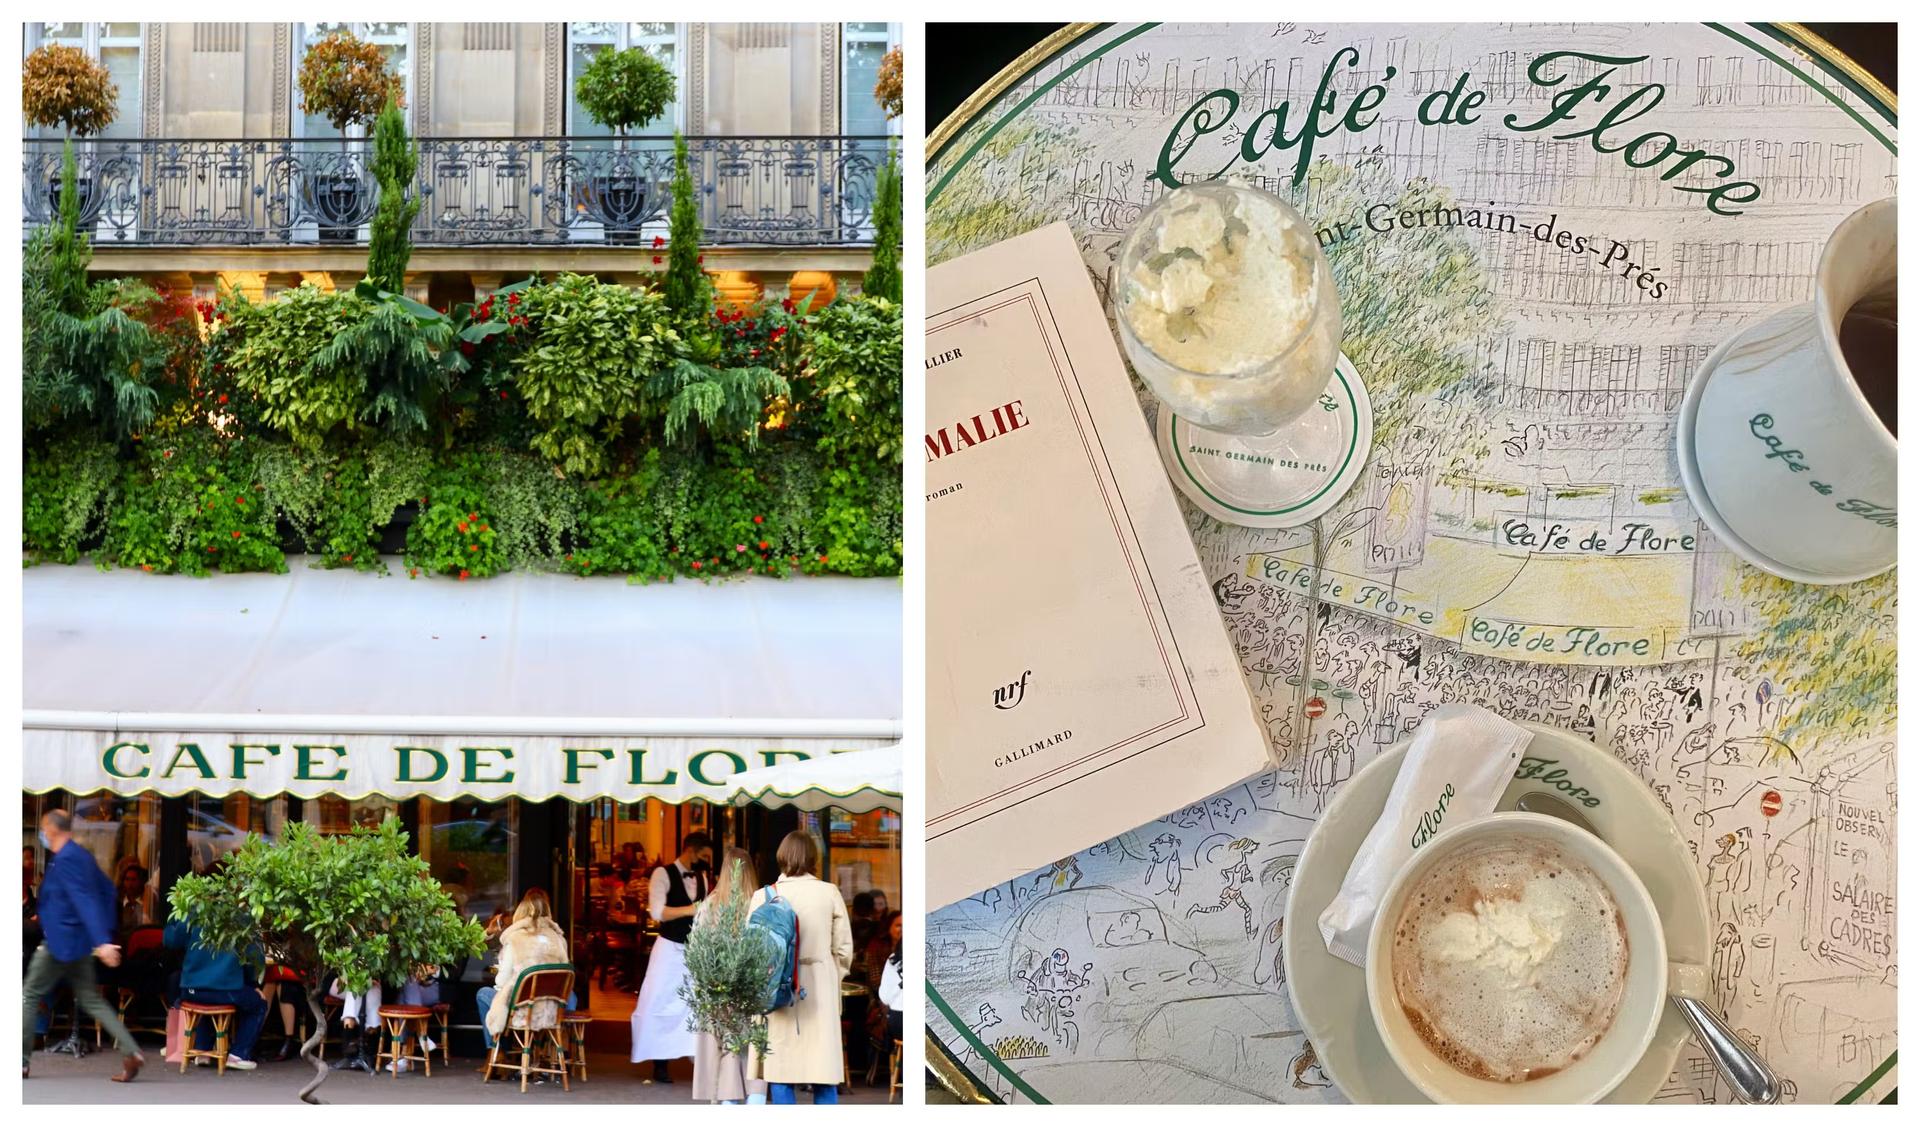 Reading in Cafe de Flore with a cup of coffee